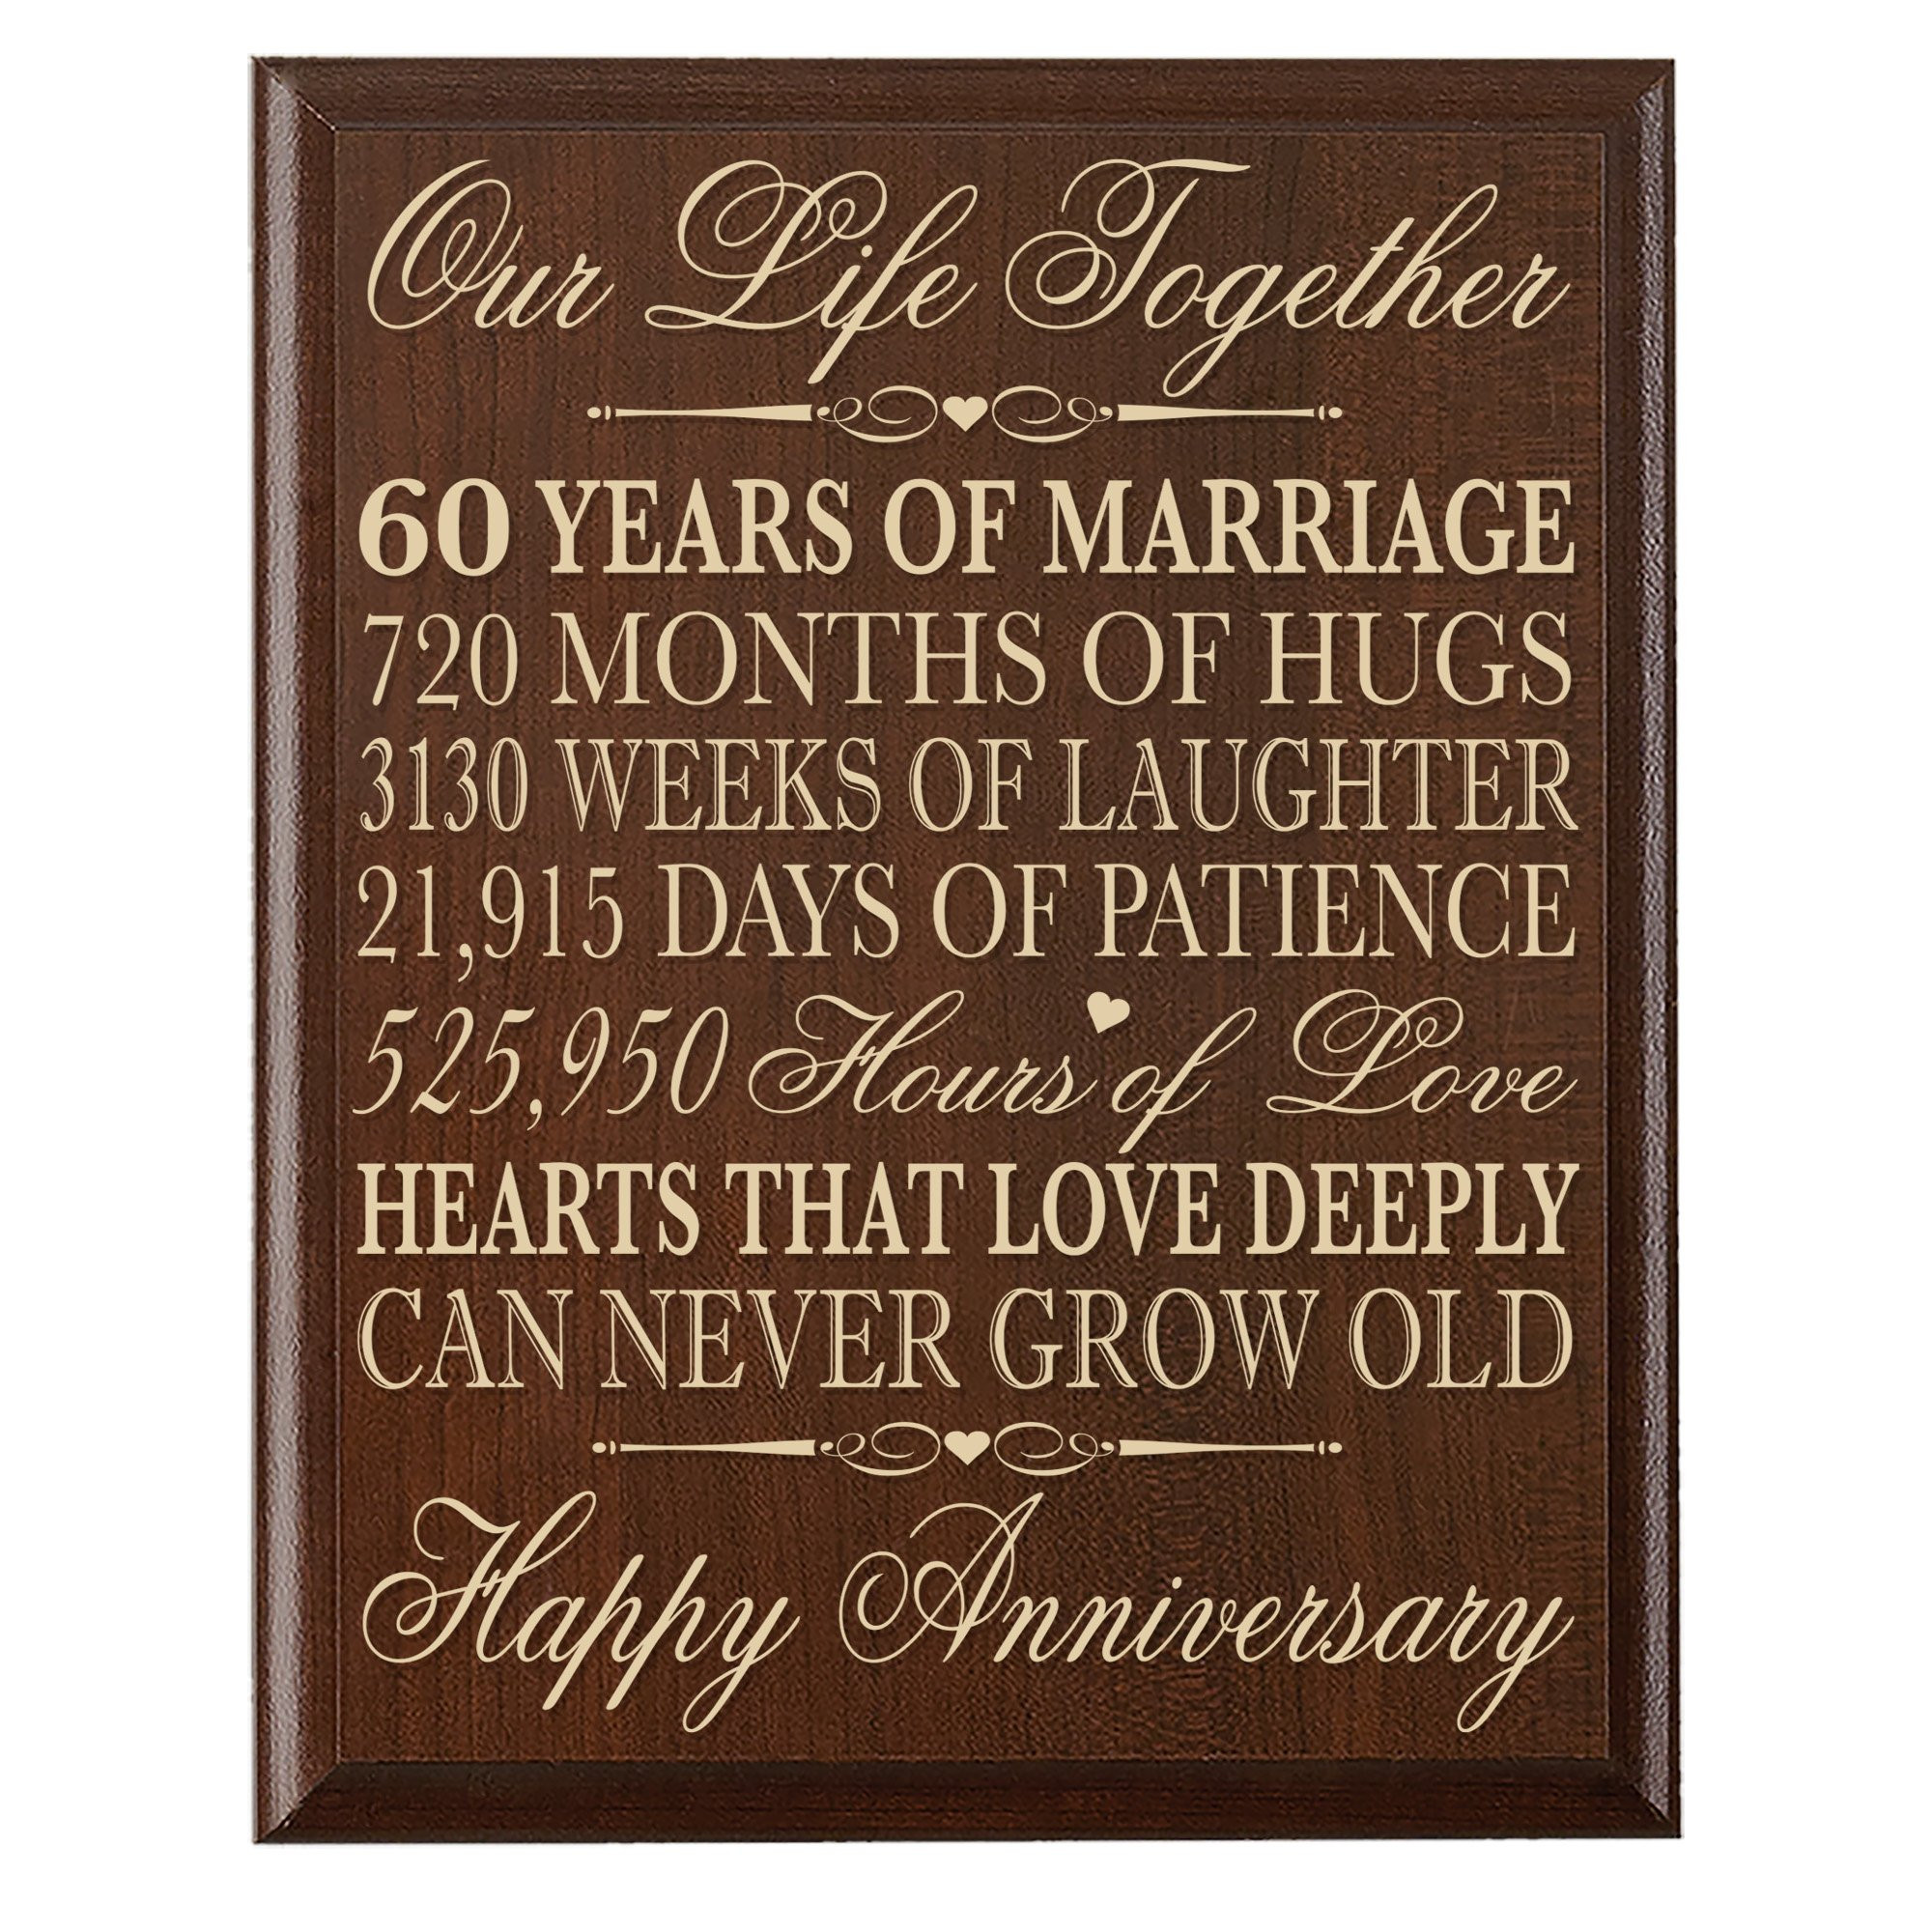 60th Wedding Anniversary Colors
 60th Wedding Anniversary Wall Plaque Gifts for Couple